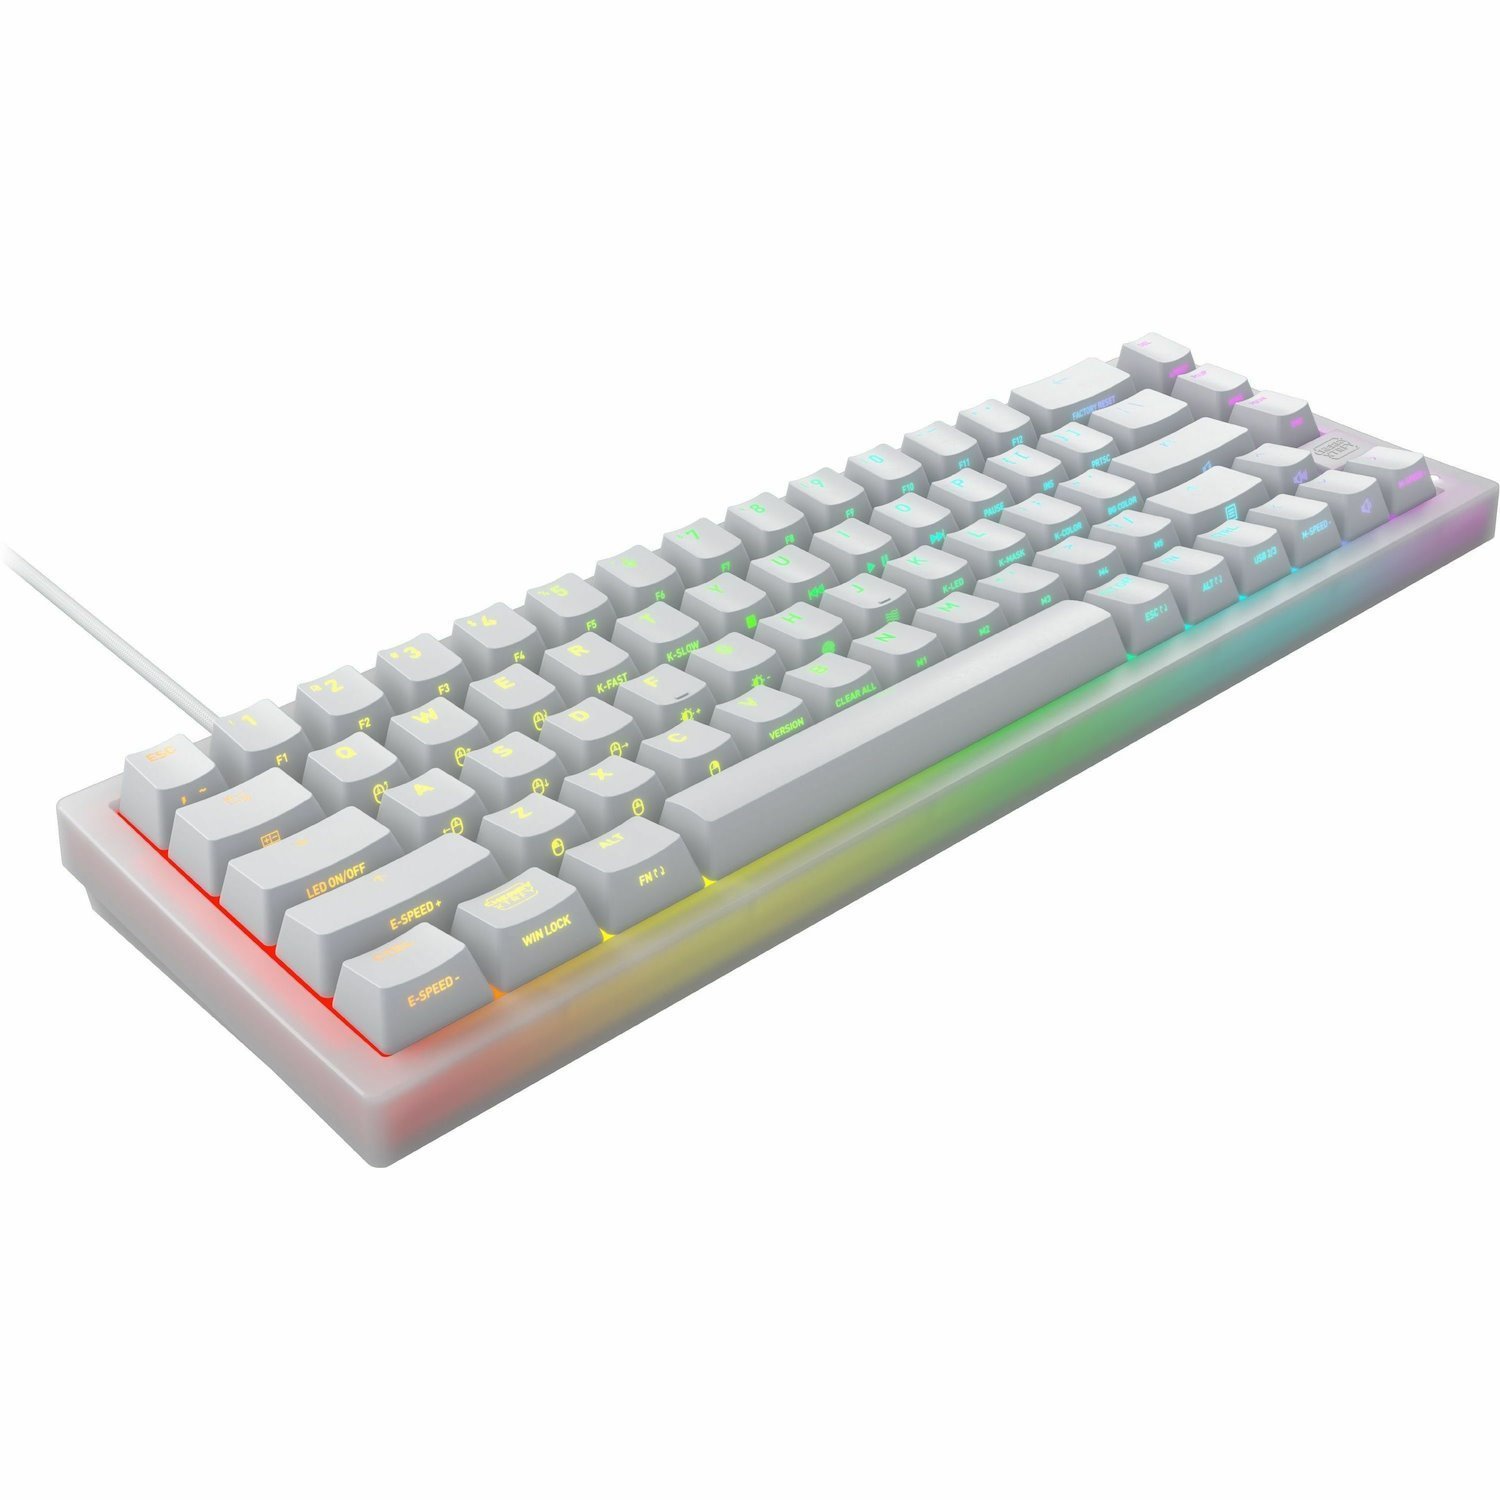 Cherry Compact Wired RGB Gaming Keyboard